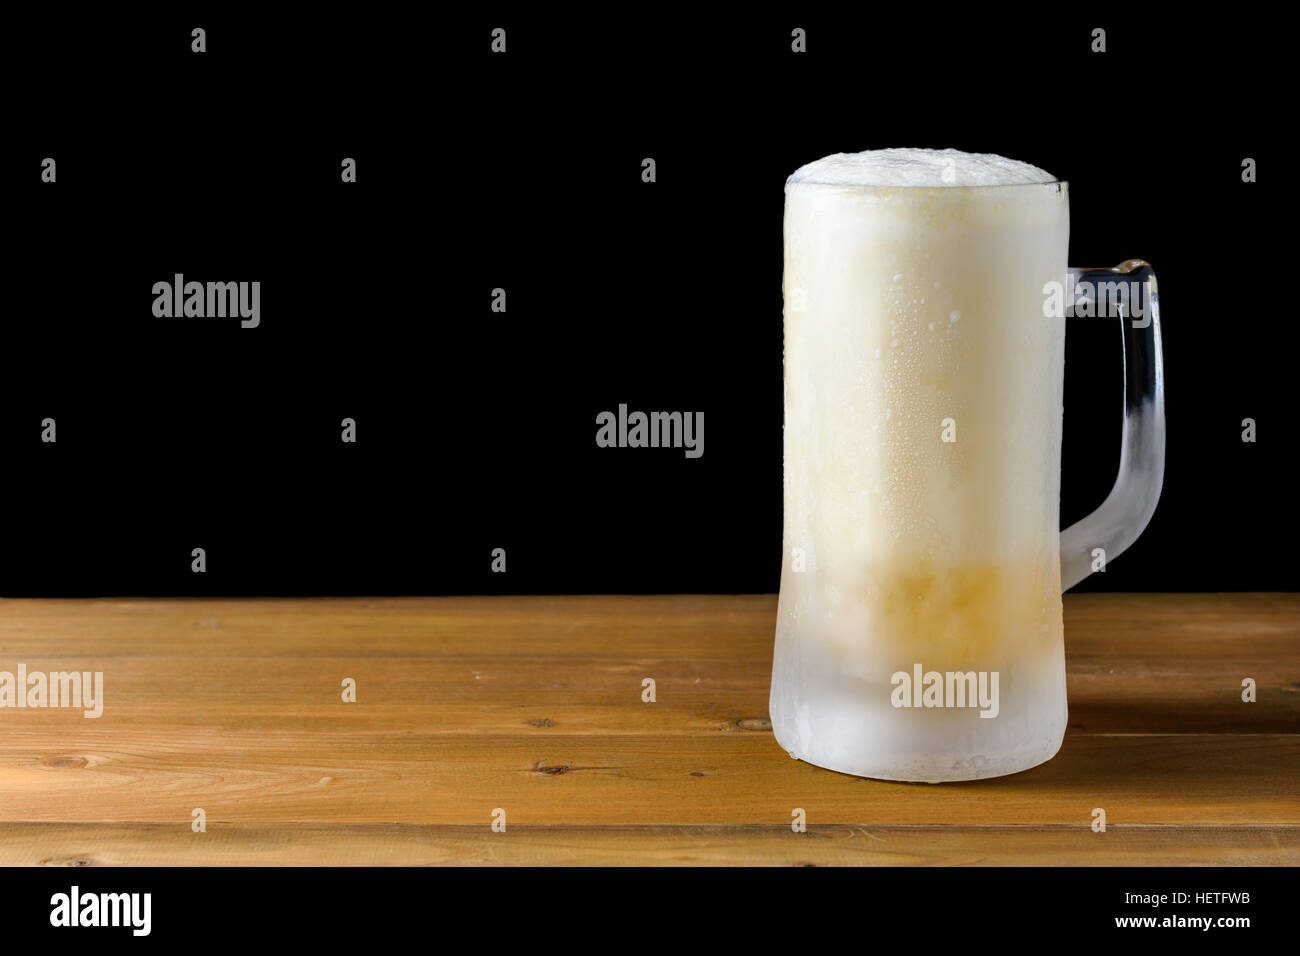 Beervana Buzz: About that Frozen Glassware You're Using